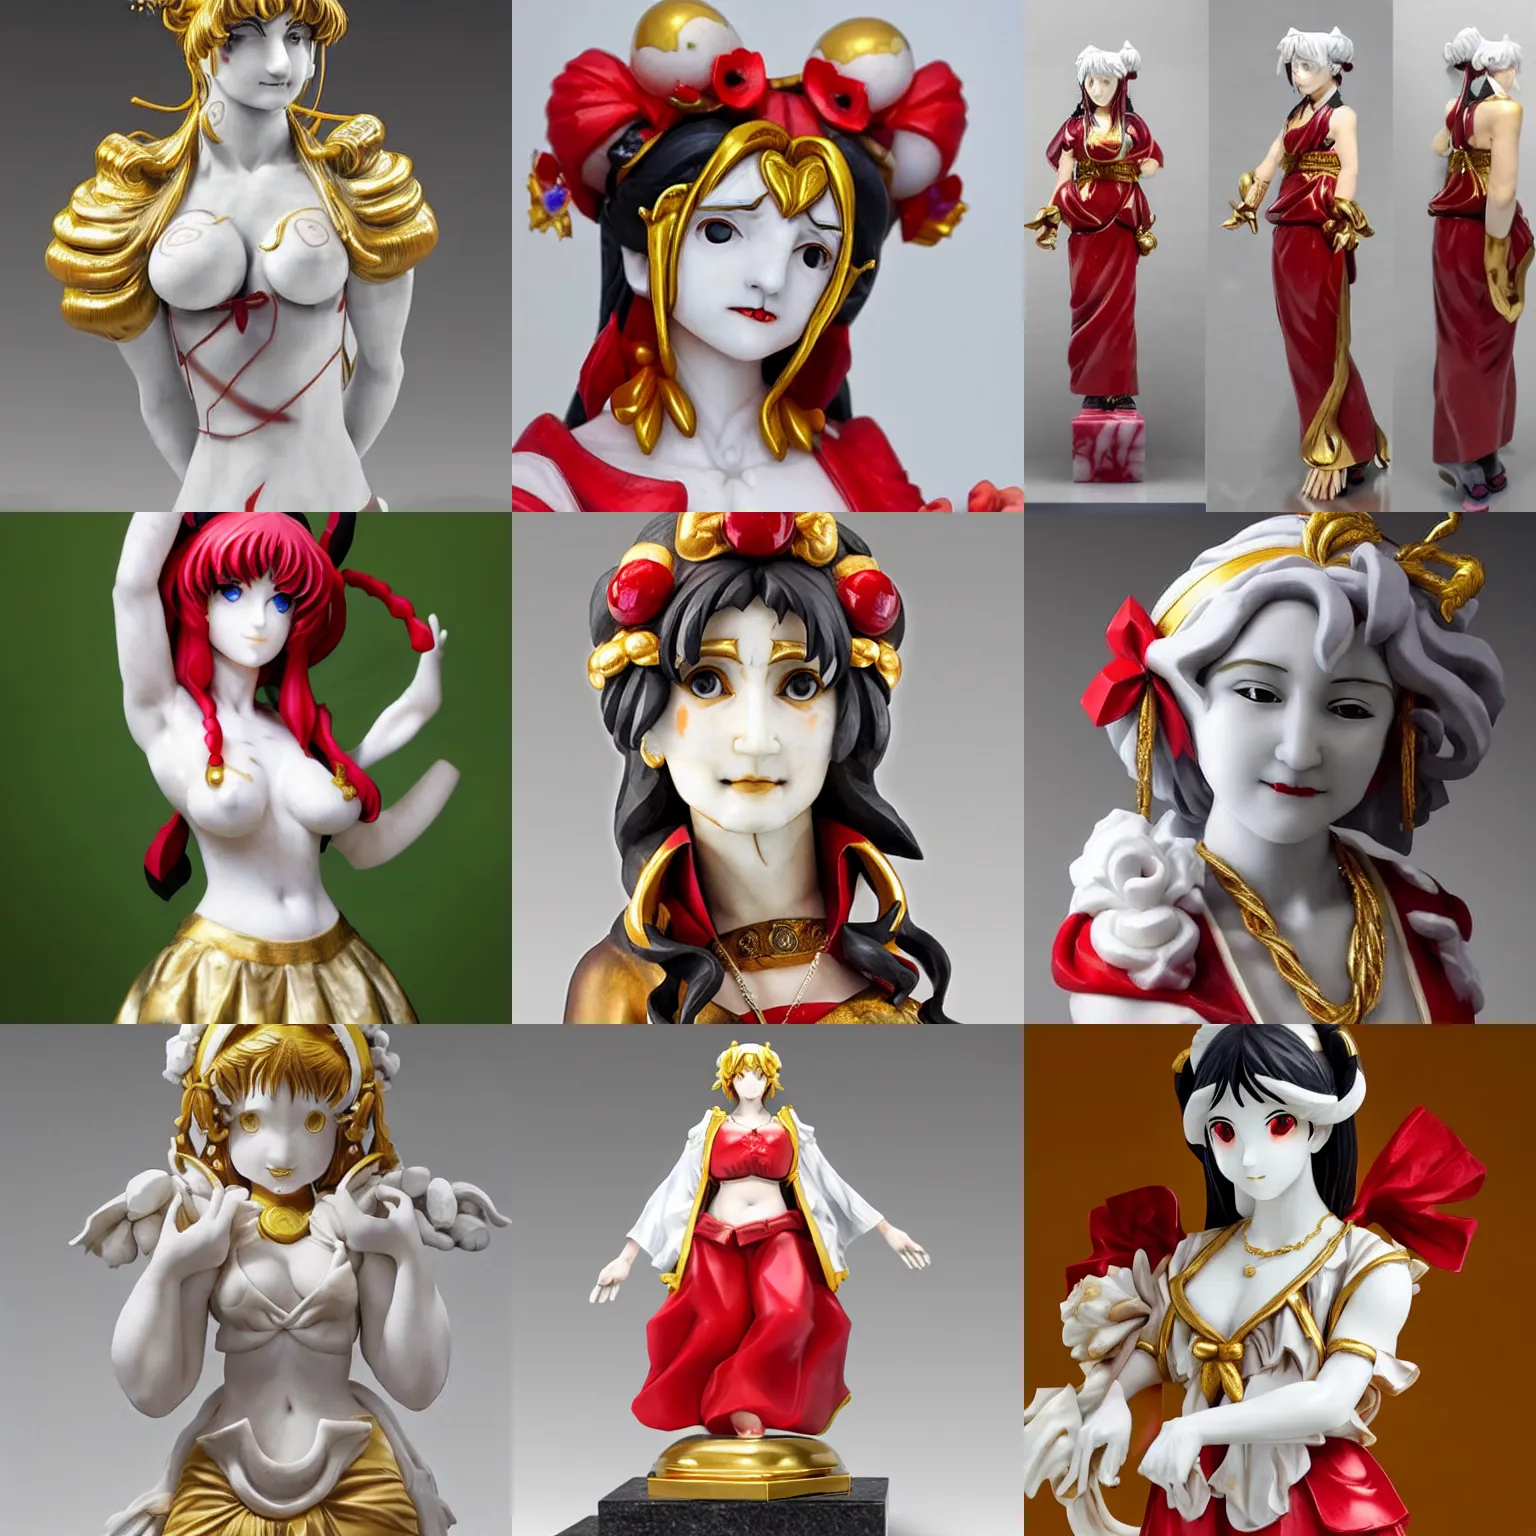 Prompt: a sculpture of reimu hakurei, marble, gold, masterpiece, anatomically correct, looks like a real person